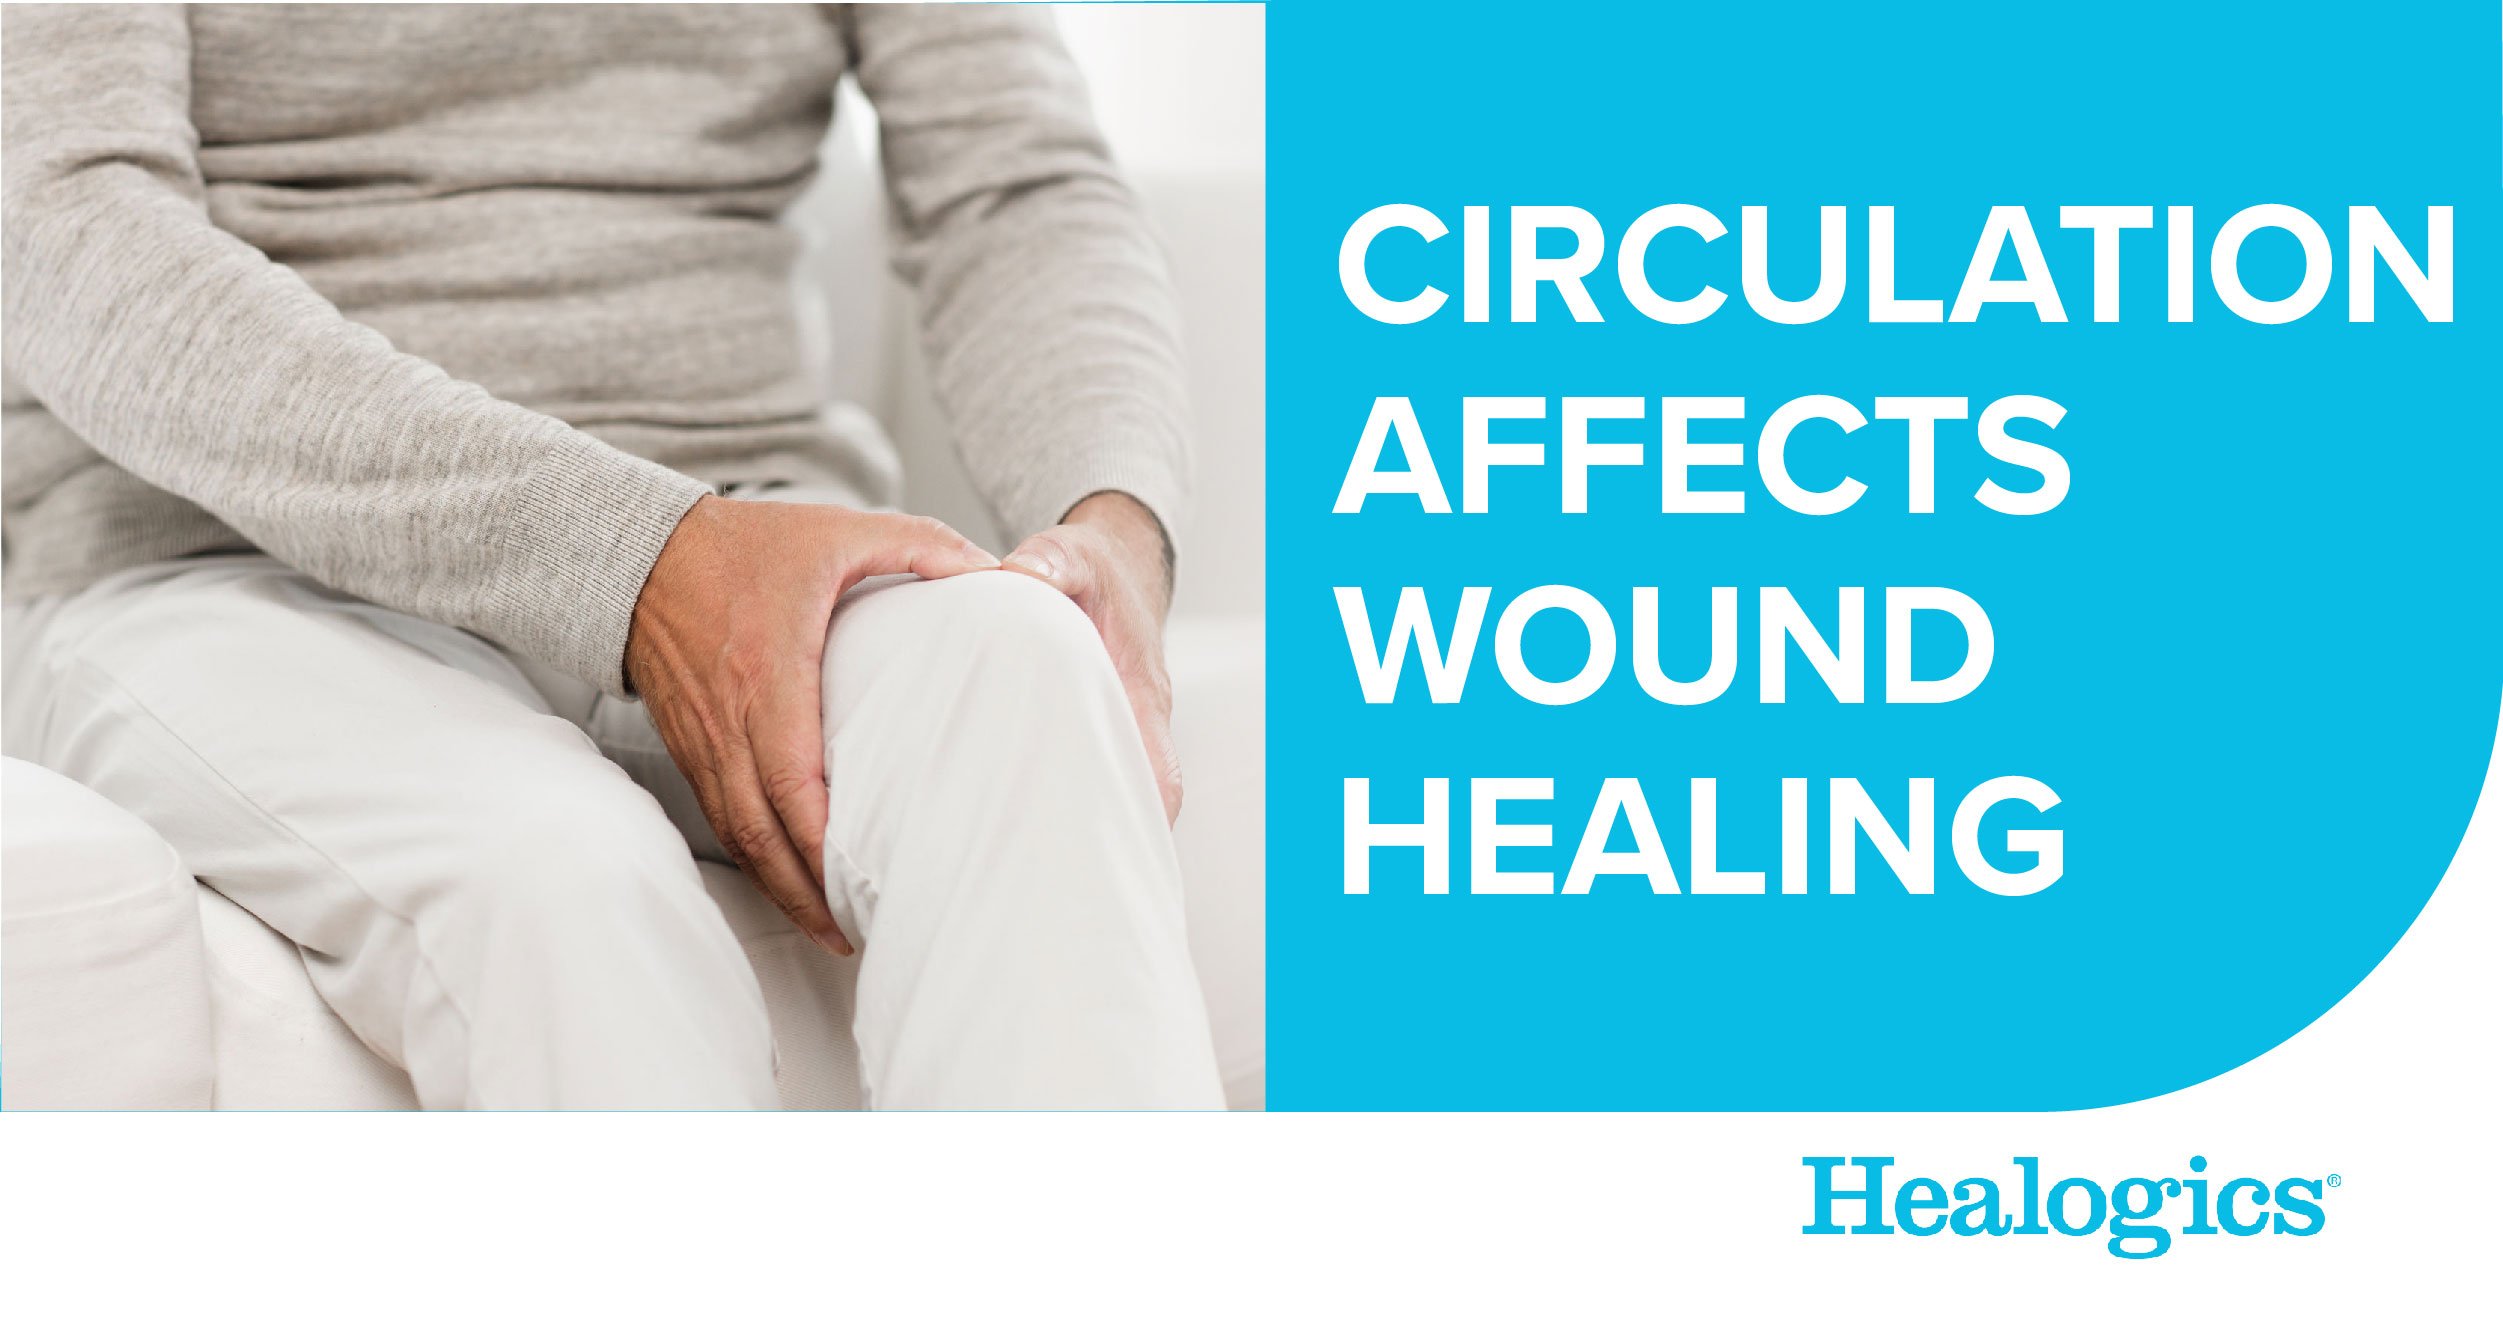 Your Circulation System Is Essential To Wound Healing